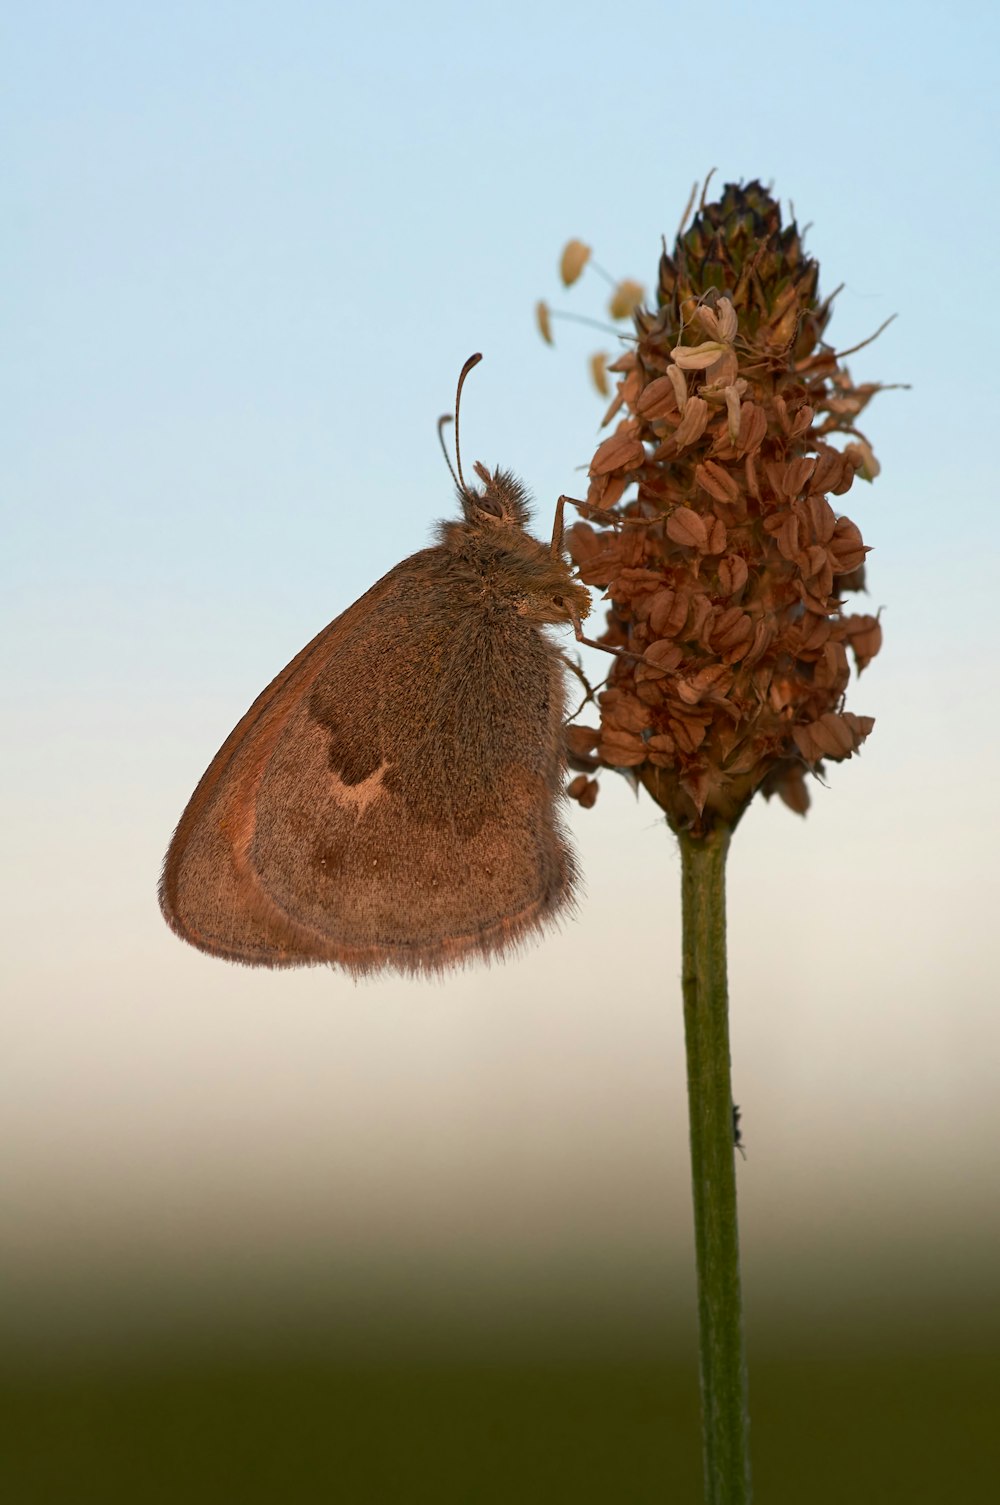 brown butterfly perched on brown flower in close up photography during daytime